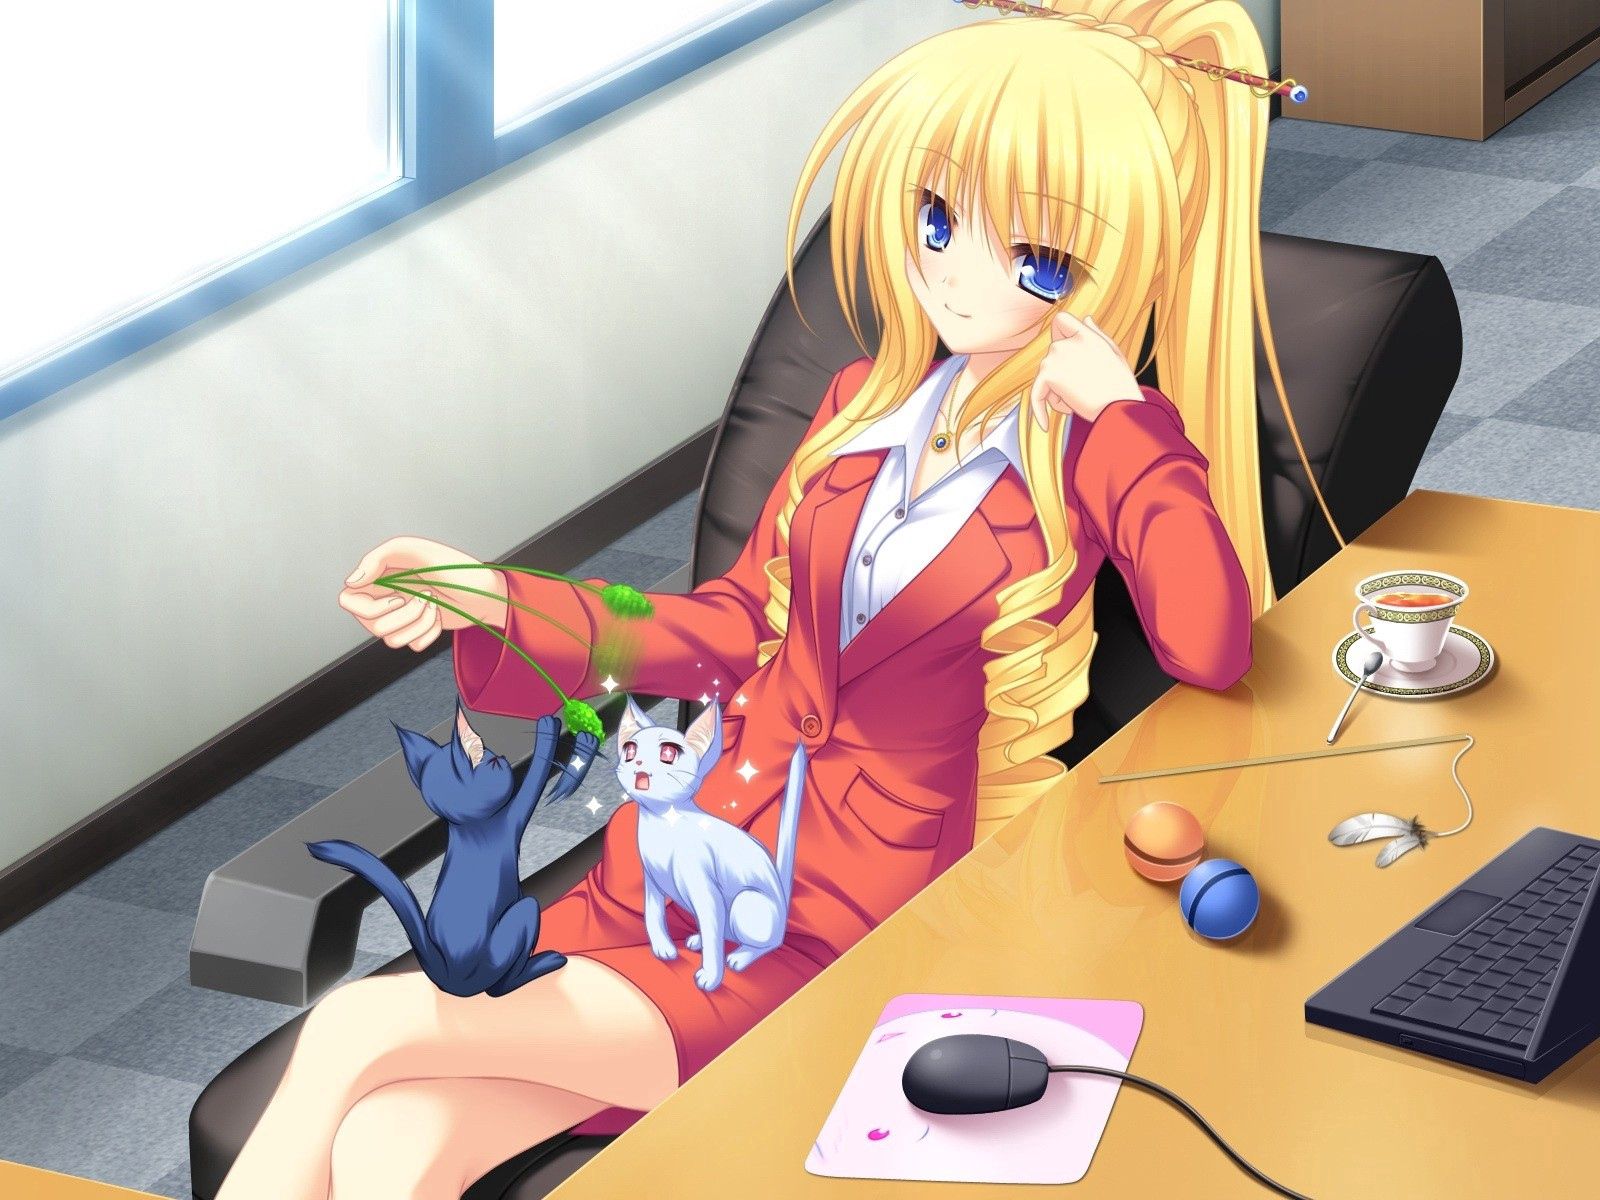 girl, anime, cat, cup, game, armchair, cabinet